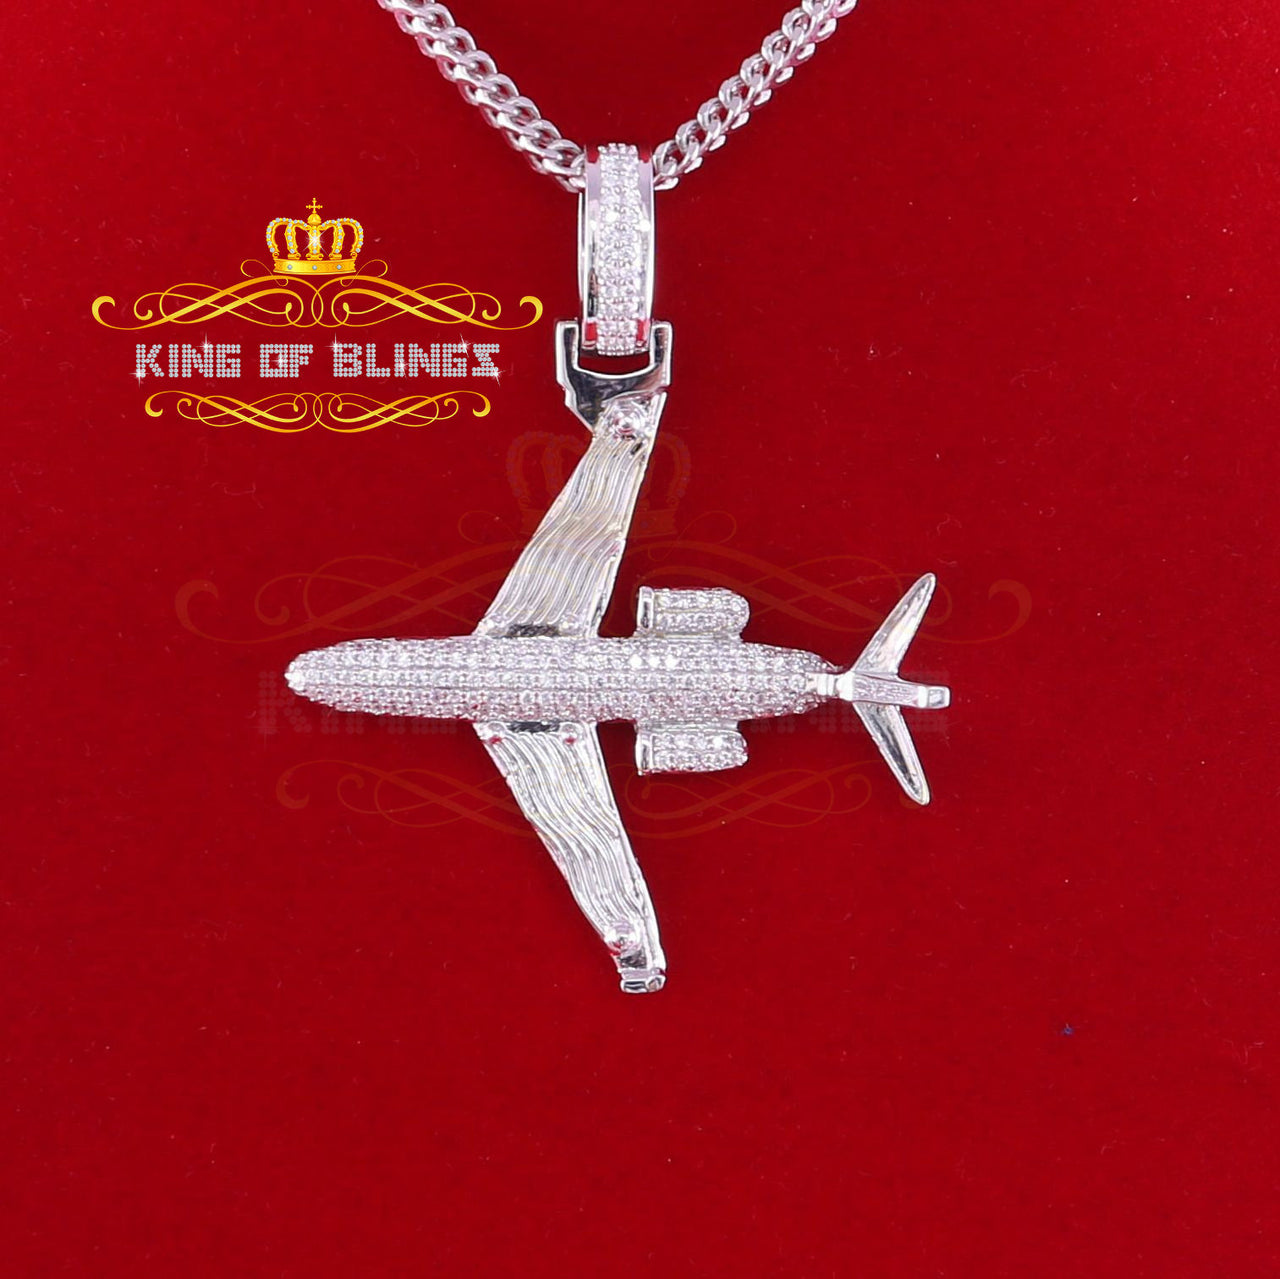 White 925 Sterling Silver Aeroplane Shape Pendant with 1.82ct Cubic Zirconia KING OF BLINGS